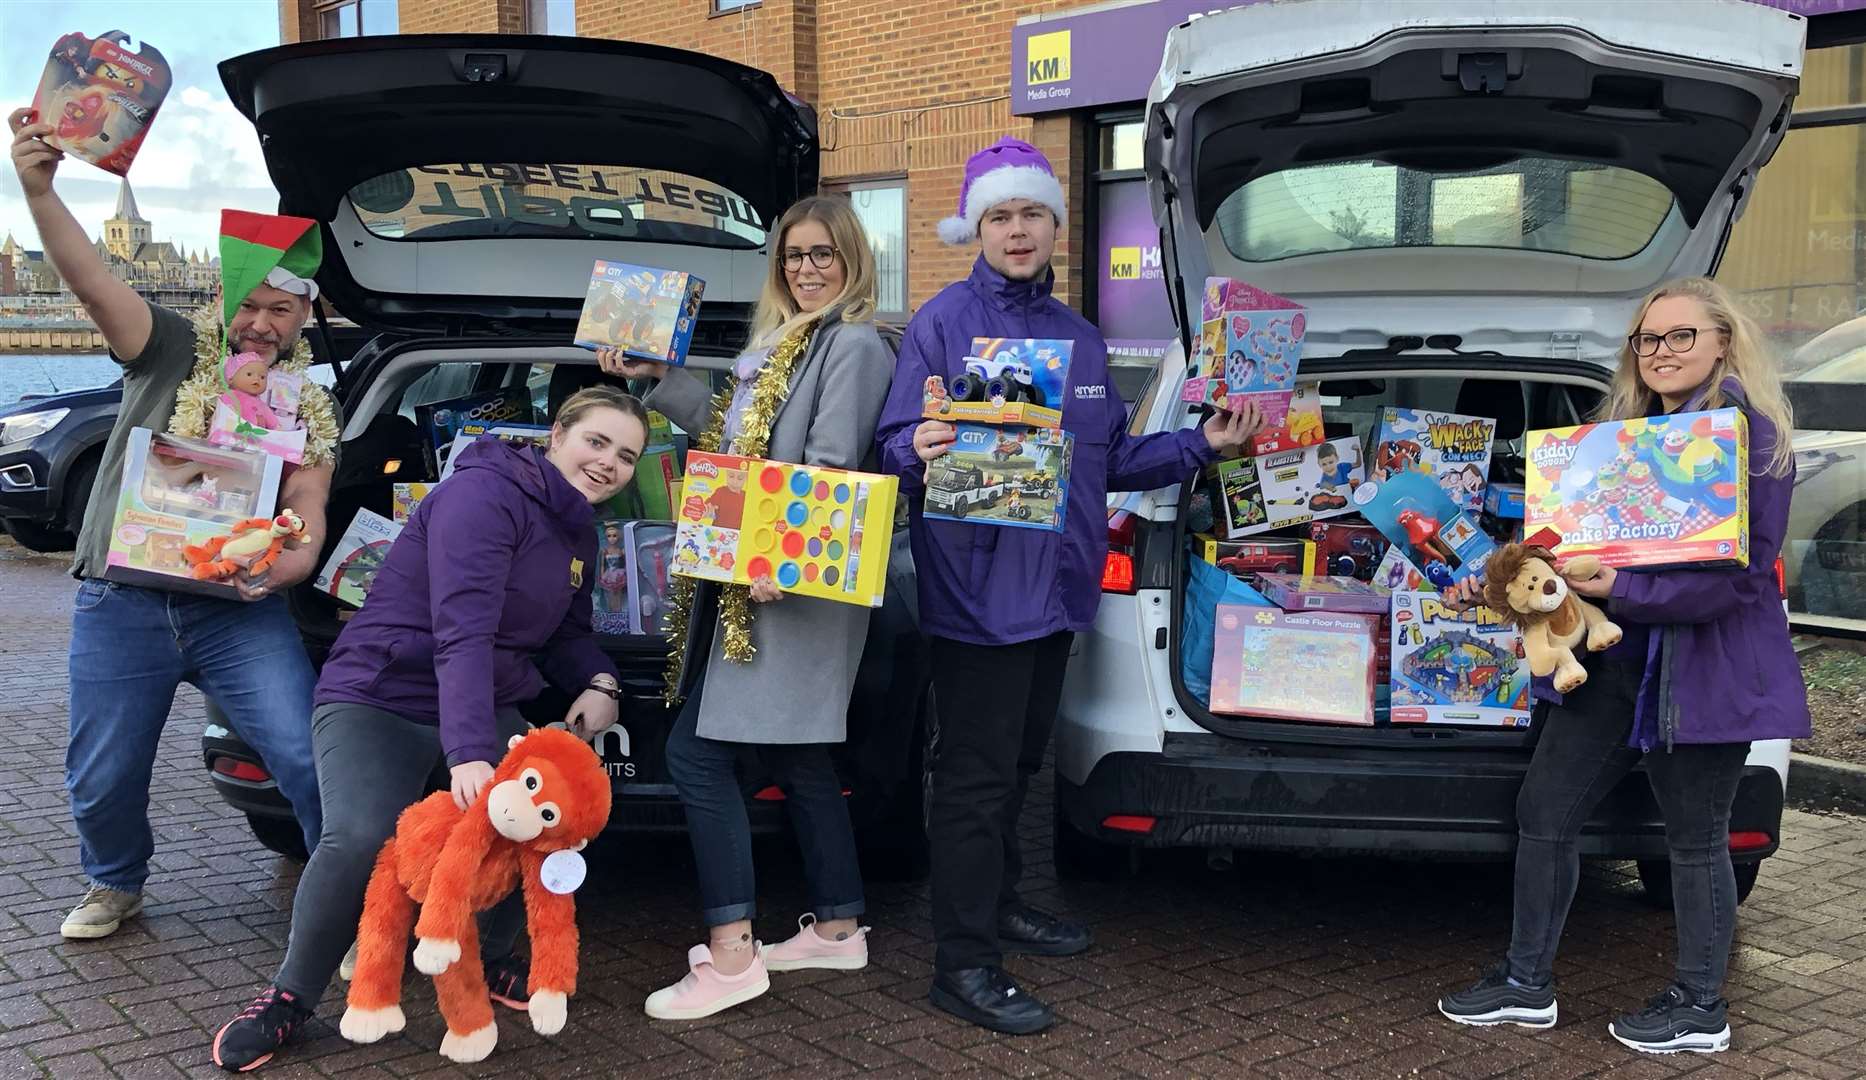 The kmfm Street Team and breakfast show presenters Garry and Laura get ready to deliver toys last Christmas